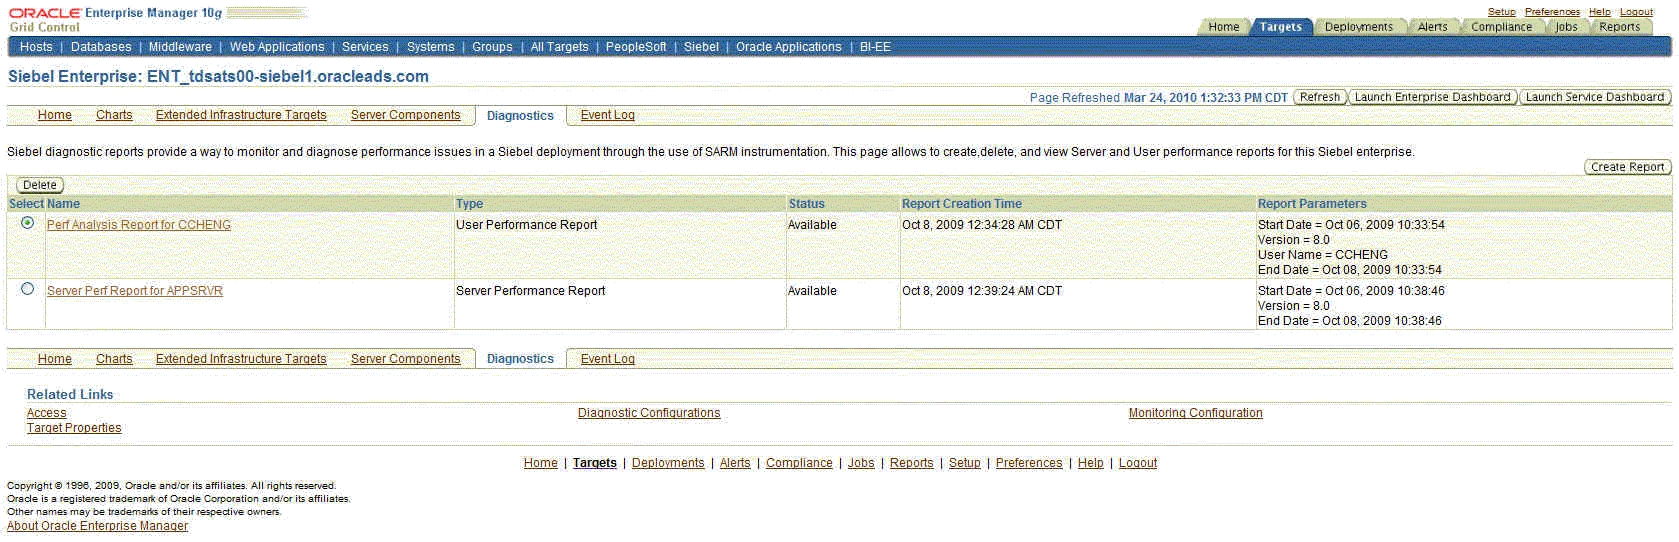 Shows sample data for Diagnostics Report page.